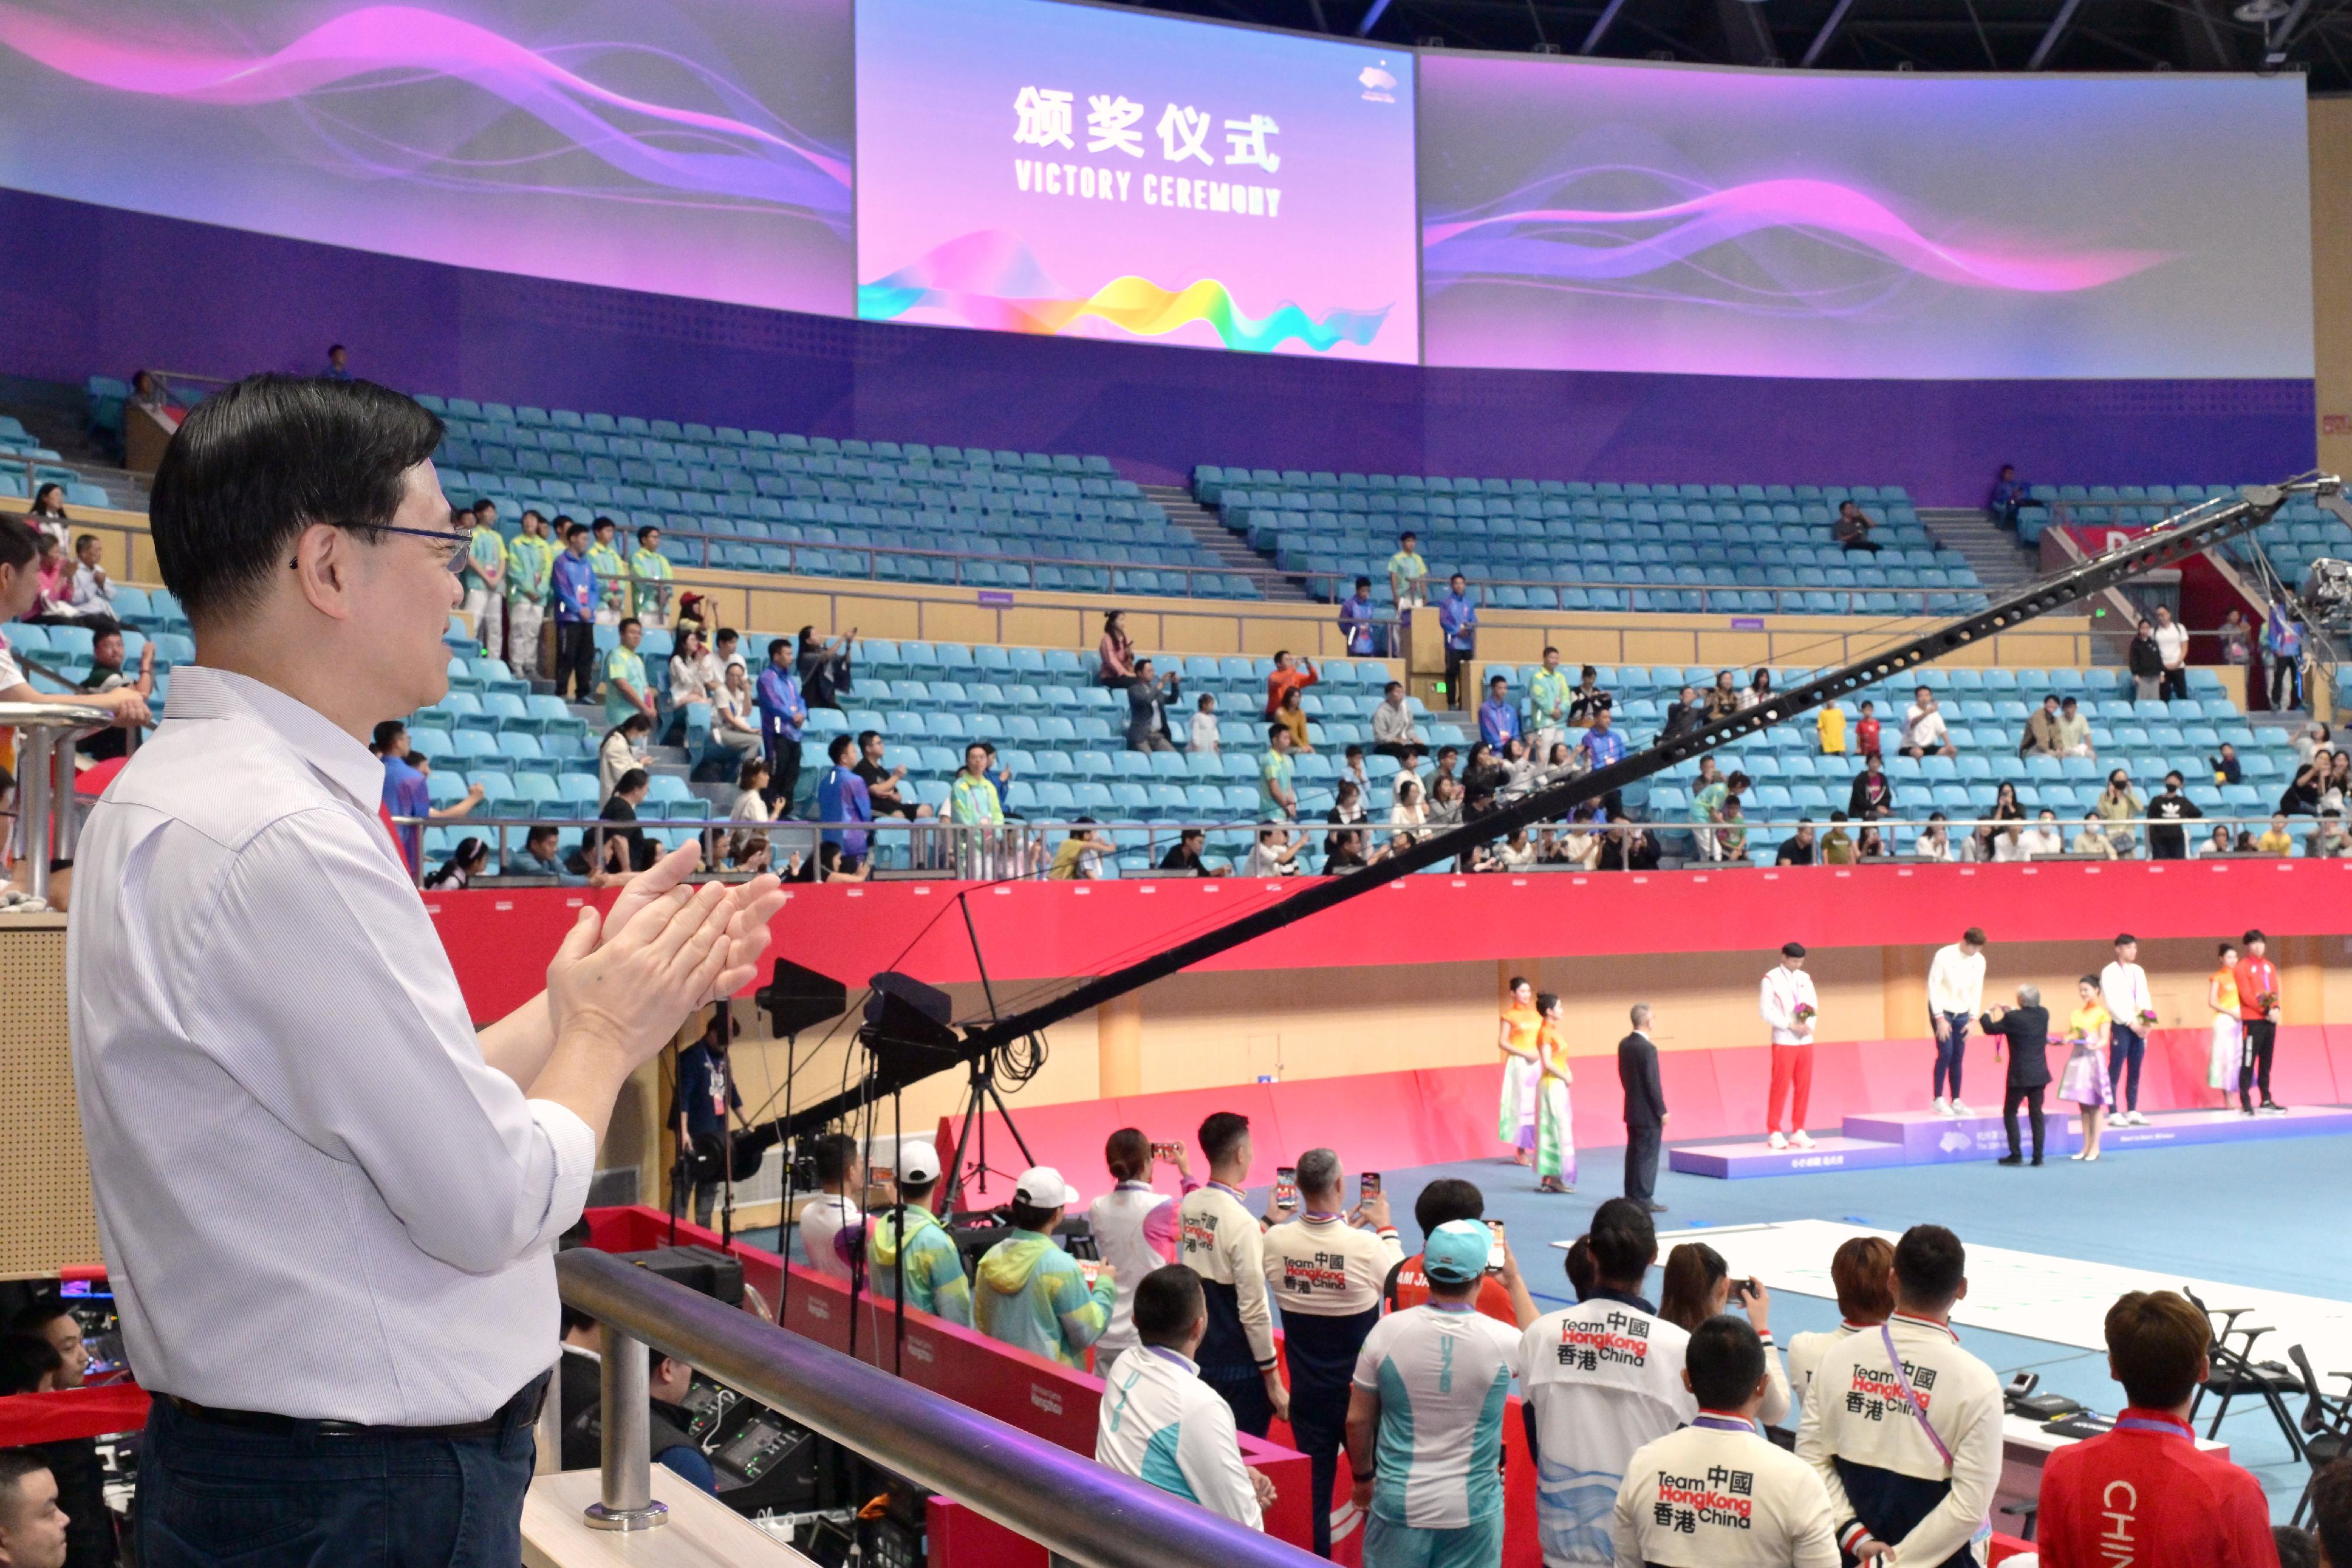 The Chief Executive, Mr John Lee, led a Hong Kong Special Administrative Region Government delegation to Hangzhou and continued his visit programme on September 24. Photo shows Mr Lee at the Victory Ceremony of the Men's Foil Individual at the 19th Asian Games Hangzhou.